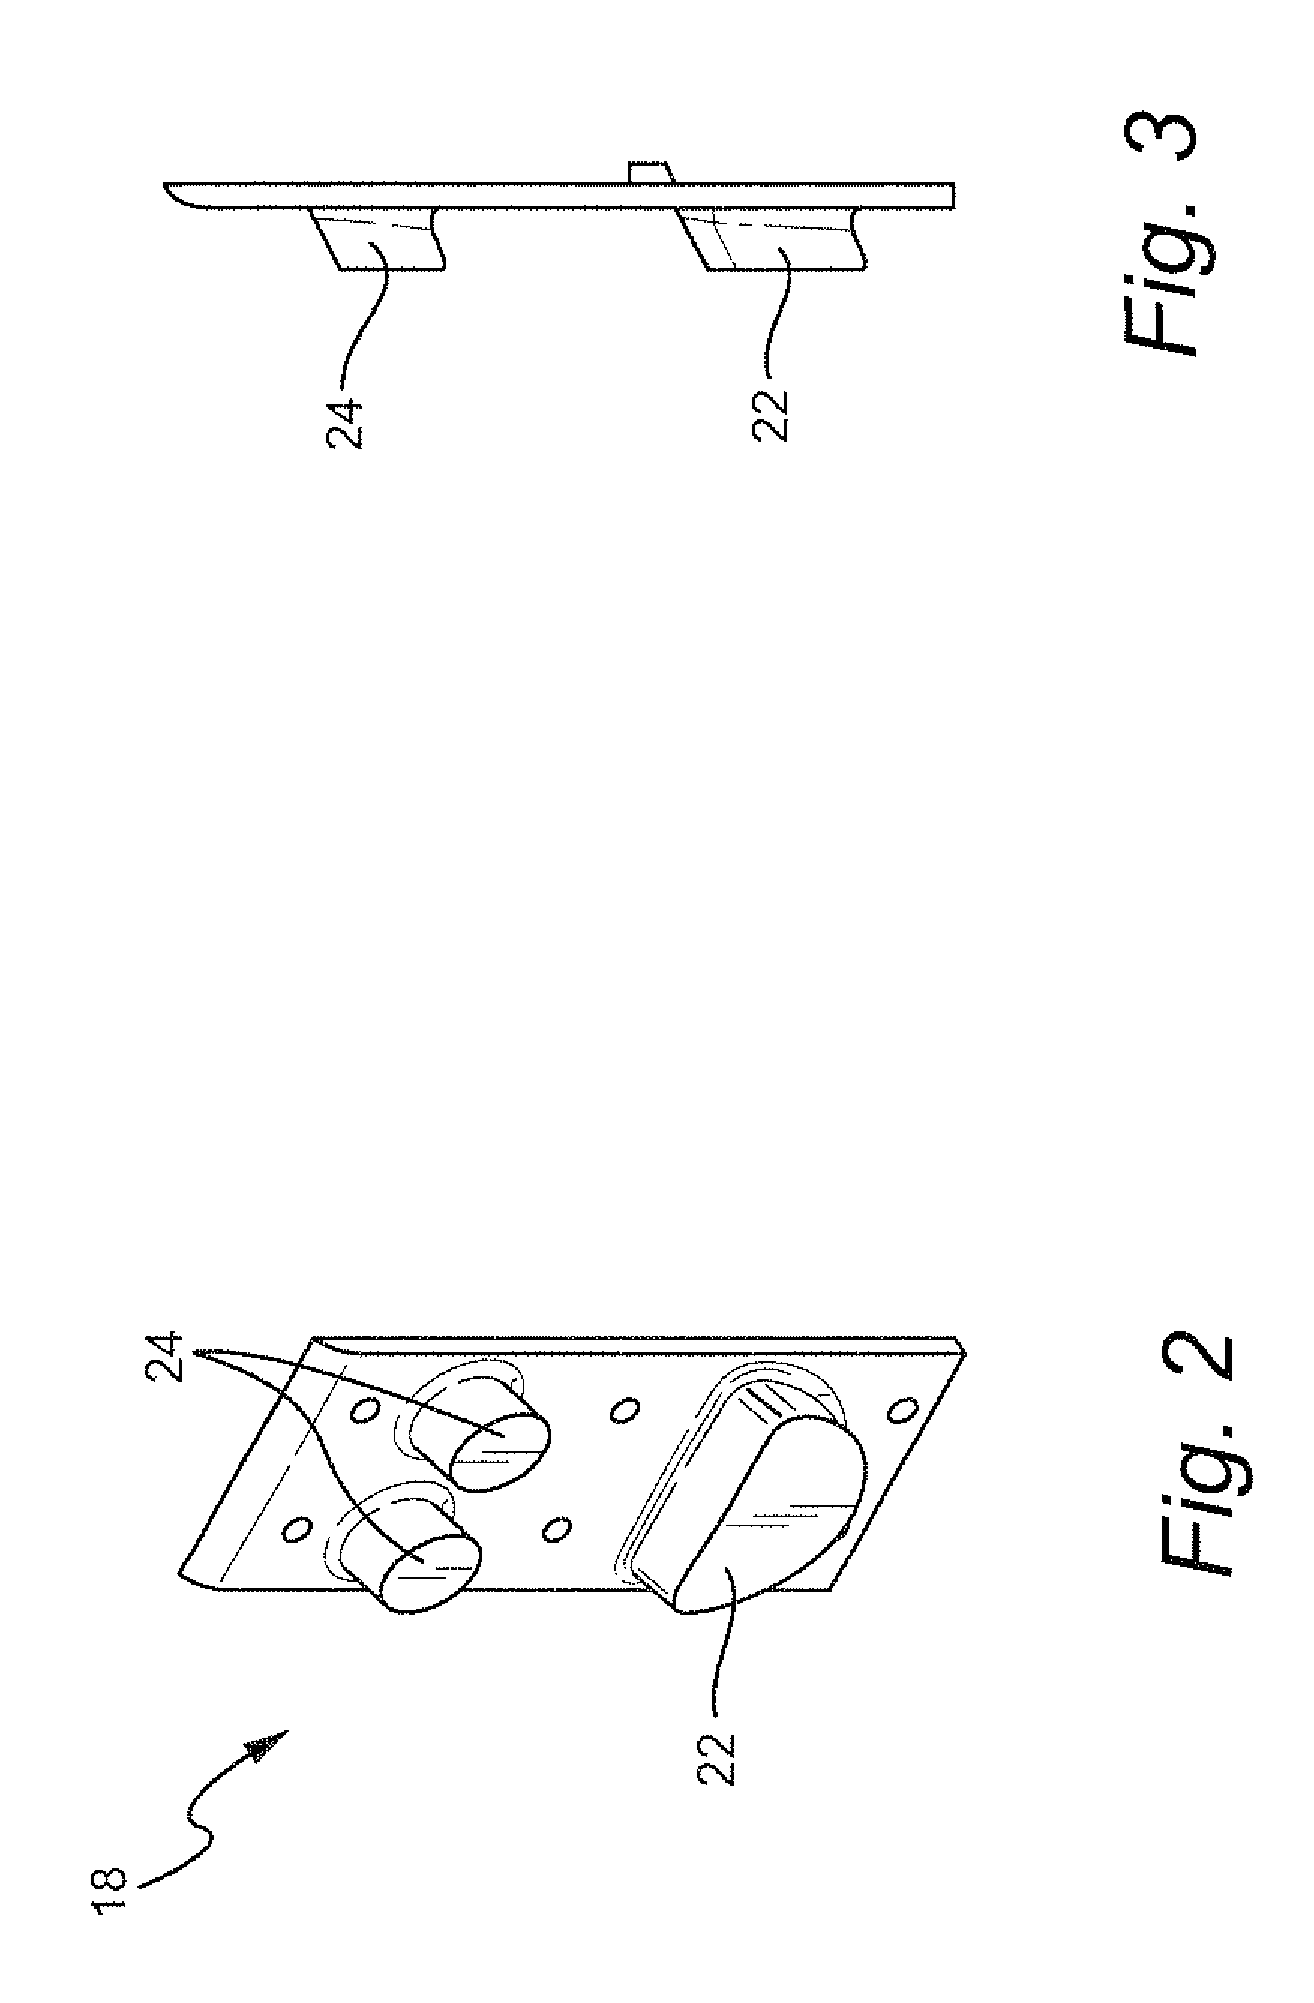 Load equalizing rope termination and method